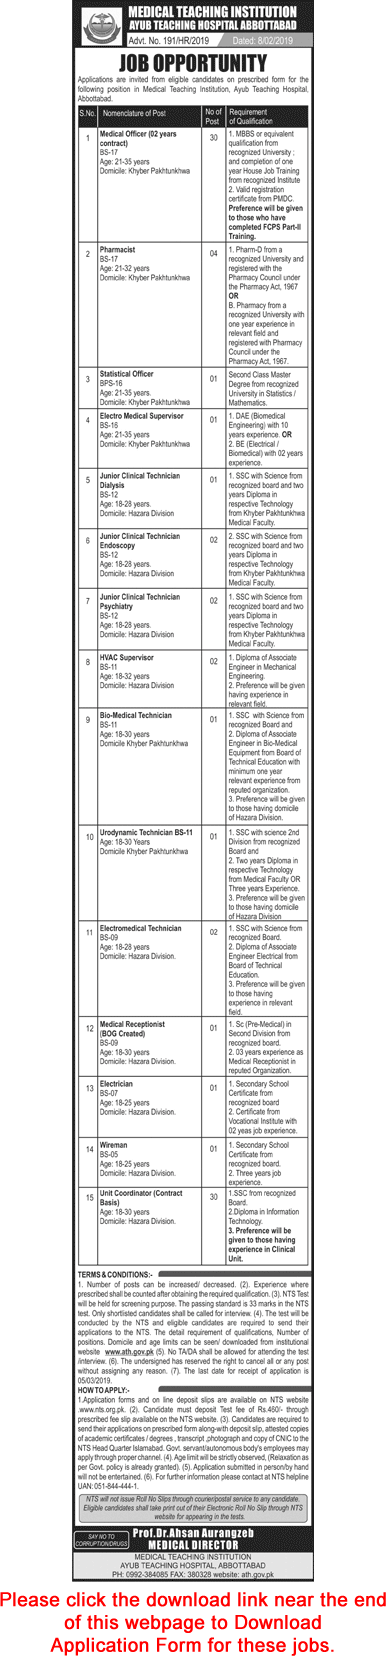 Ayub Teaching Hospital Abbottabad Jobs February 2019 MTI NTS Application Form Medical Officers & Others Latest